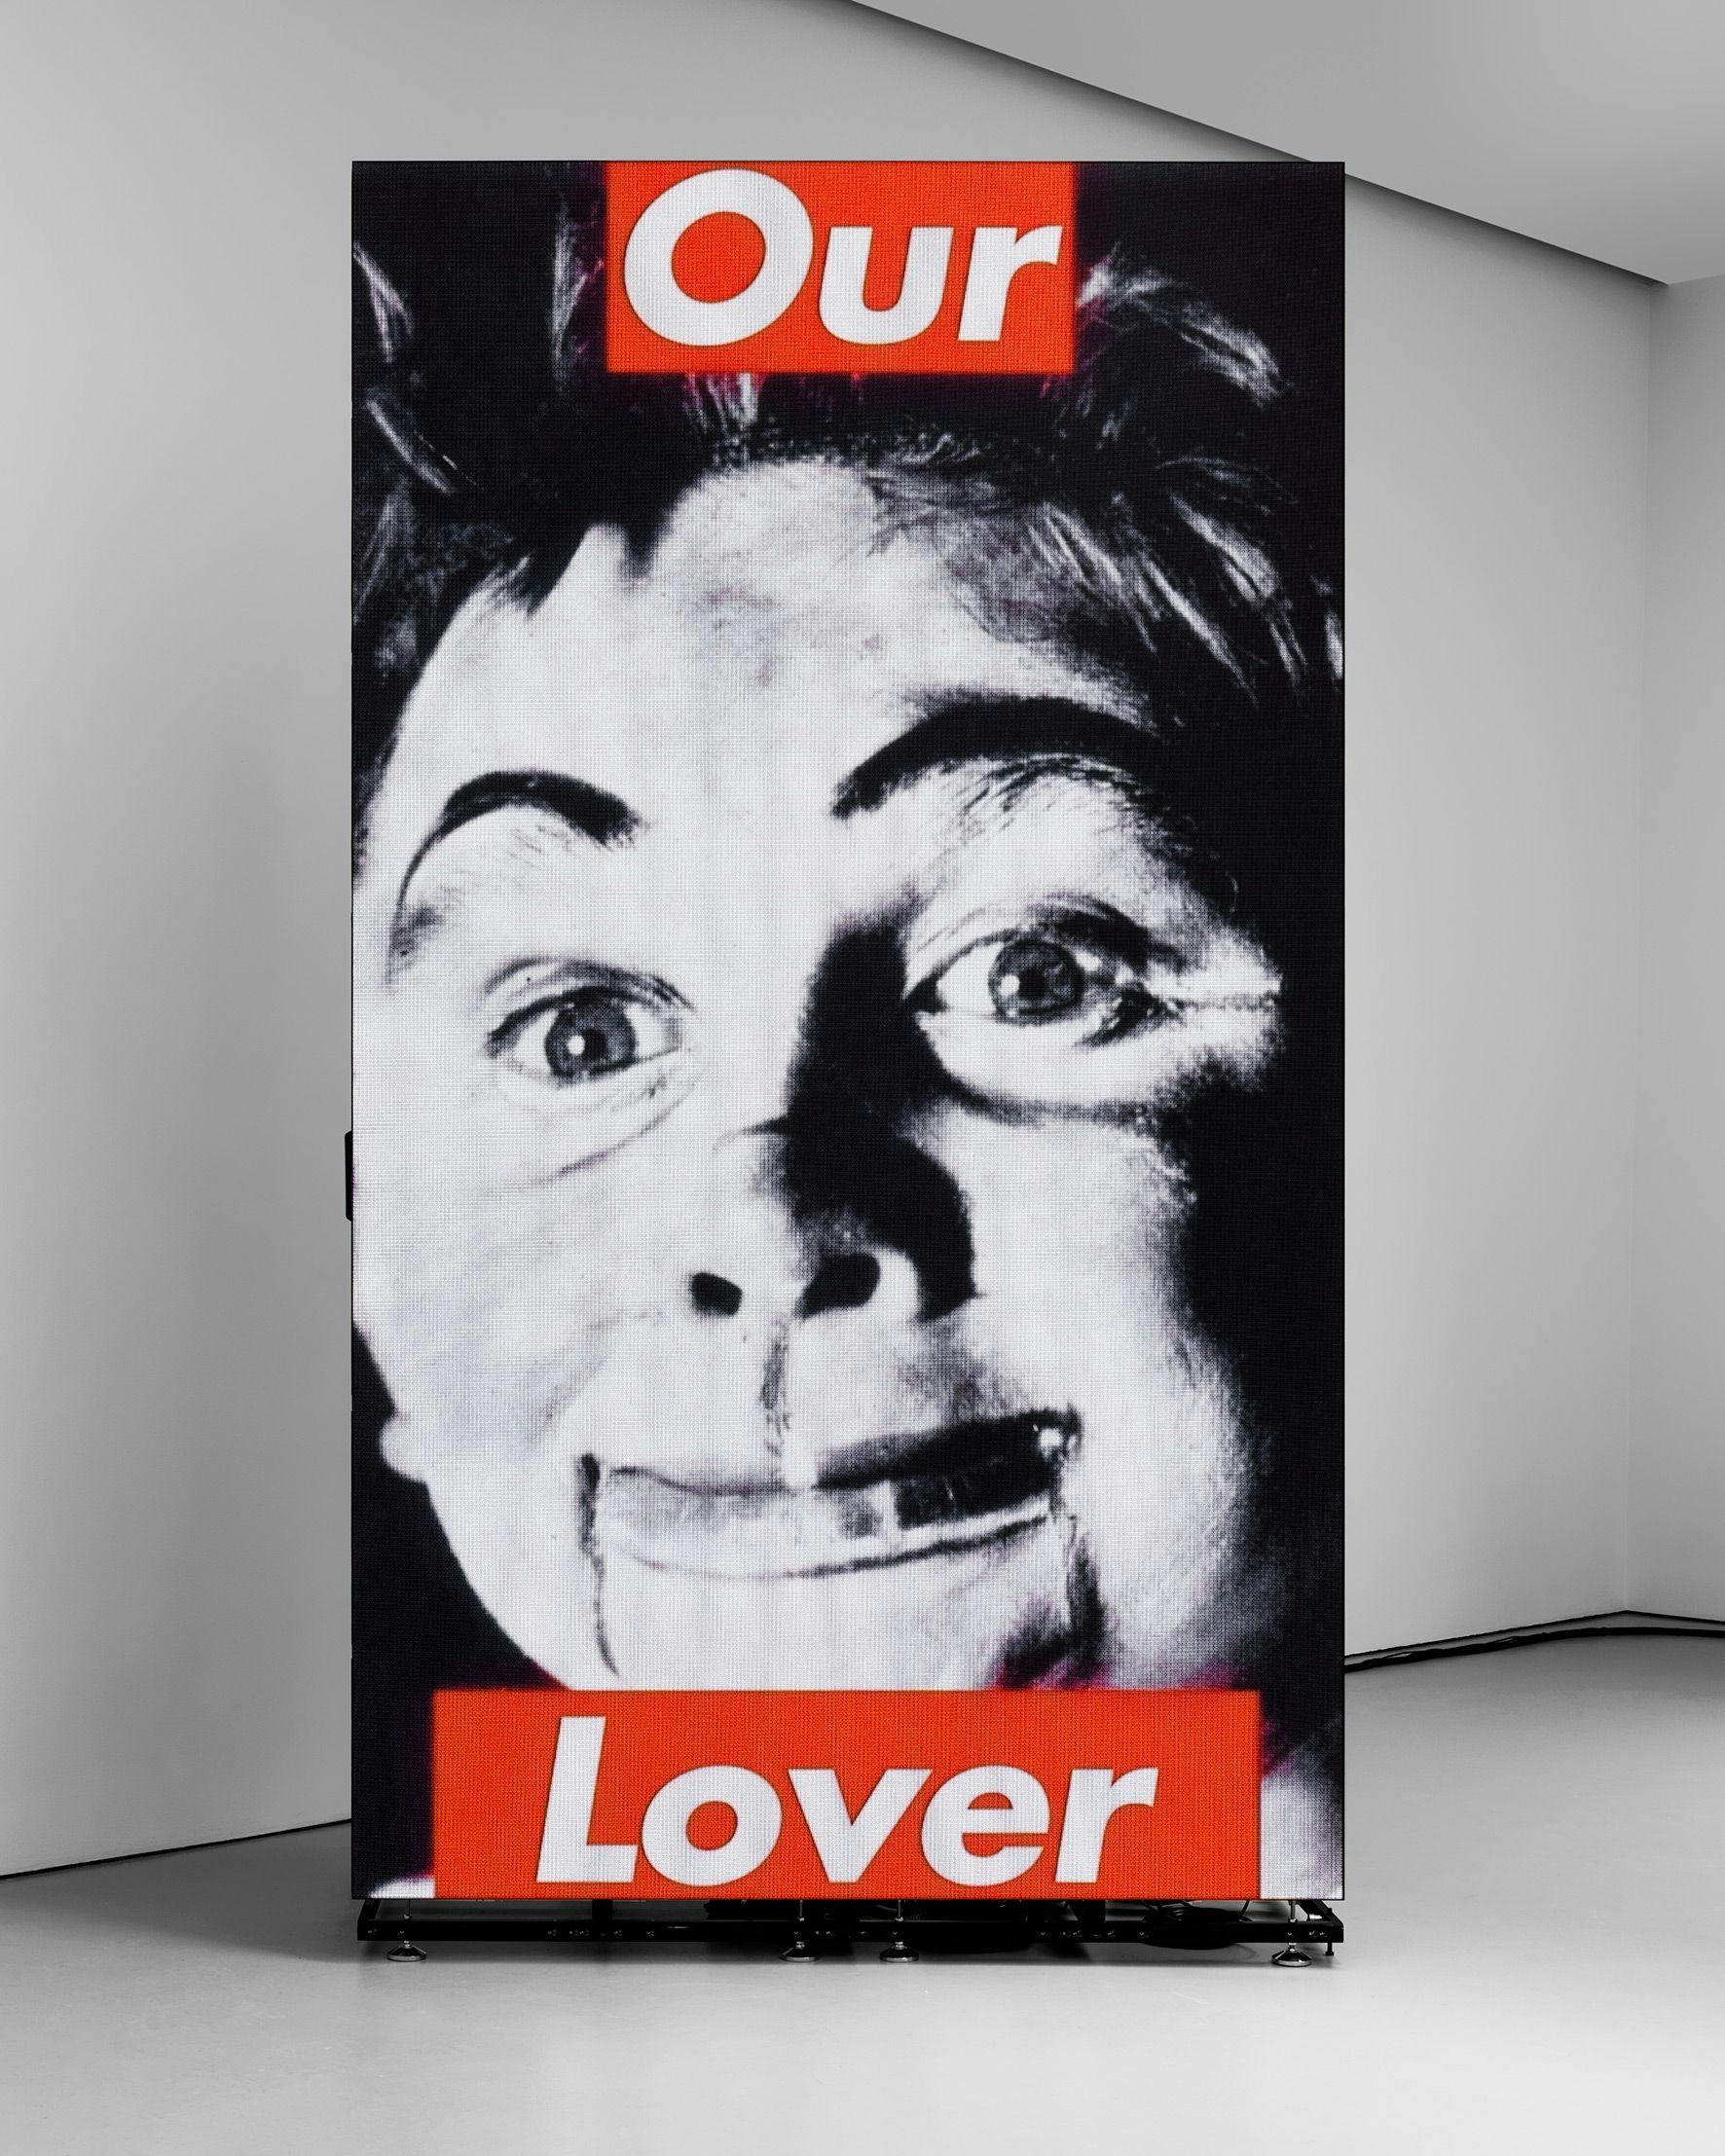 A video by Barbara Kruger, called Untitled (Our Leader), dated in 1987 and 2020.